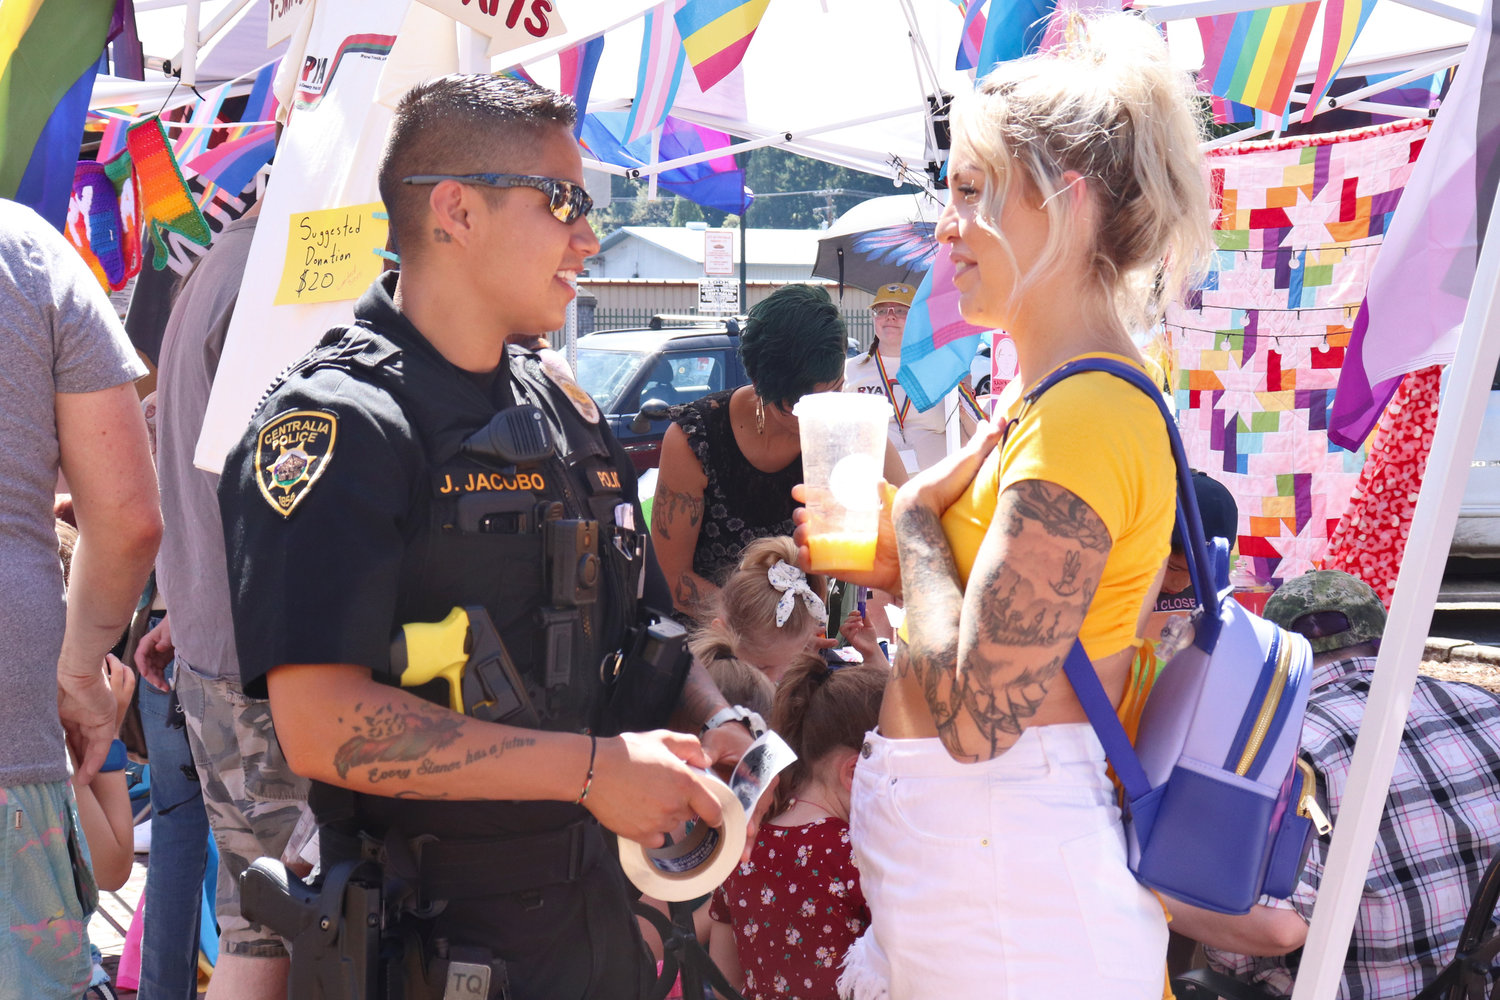 Officer Julie Jacobo with the Centralia Police Department passes out stickers alongside her wife, Kalyn Jacobo, during Lewis County Pride in Centralia on Saturday.